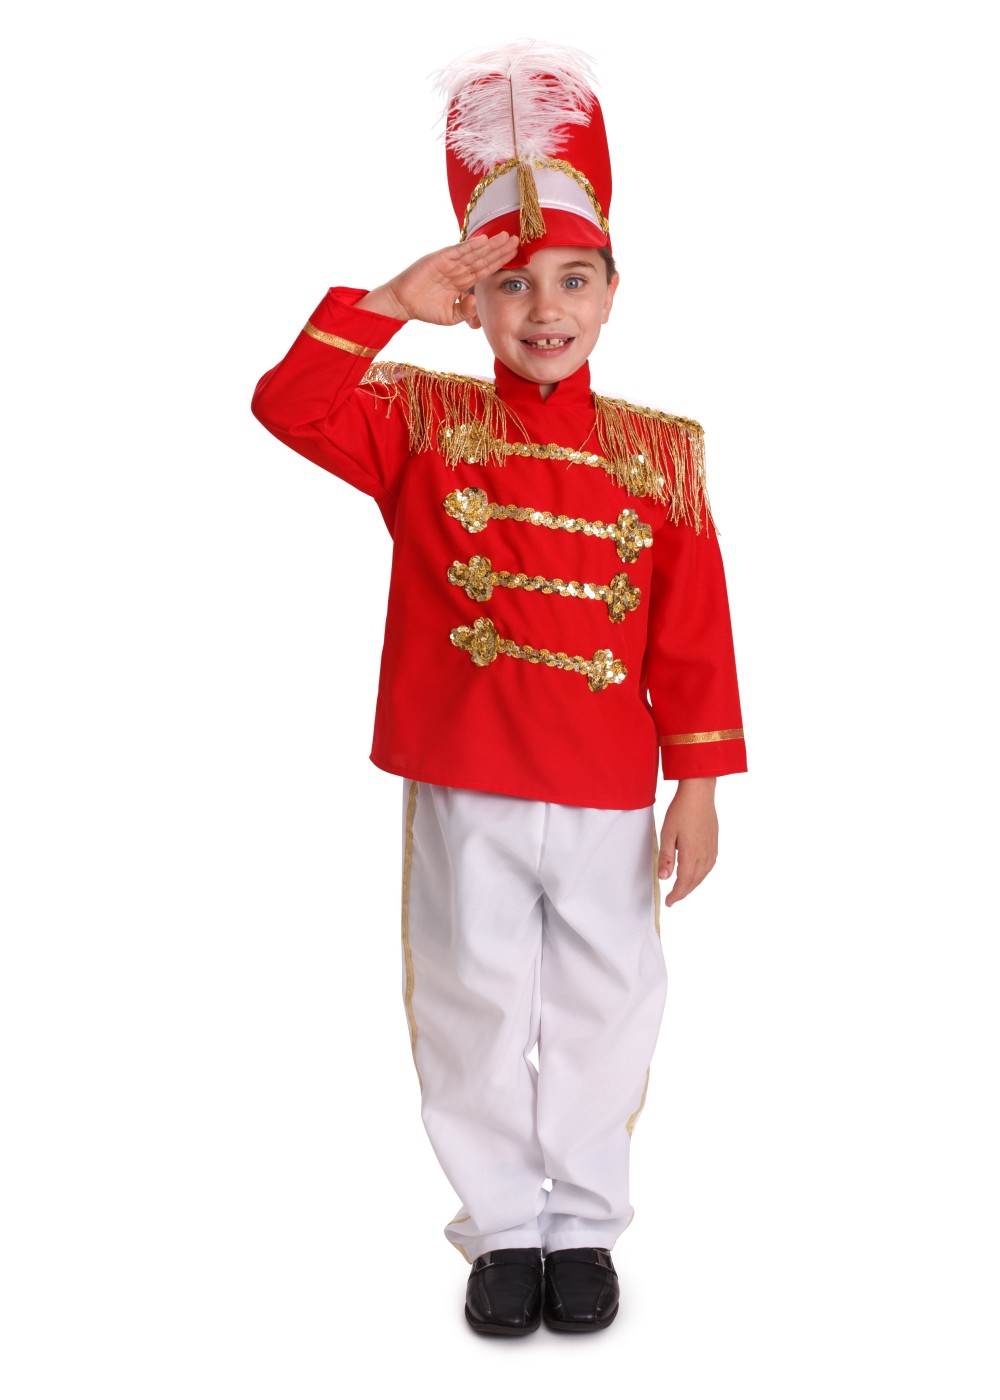 Marching Band Drum Major Boys Costume